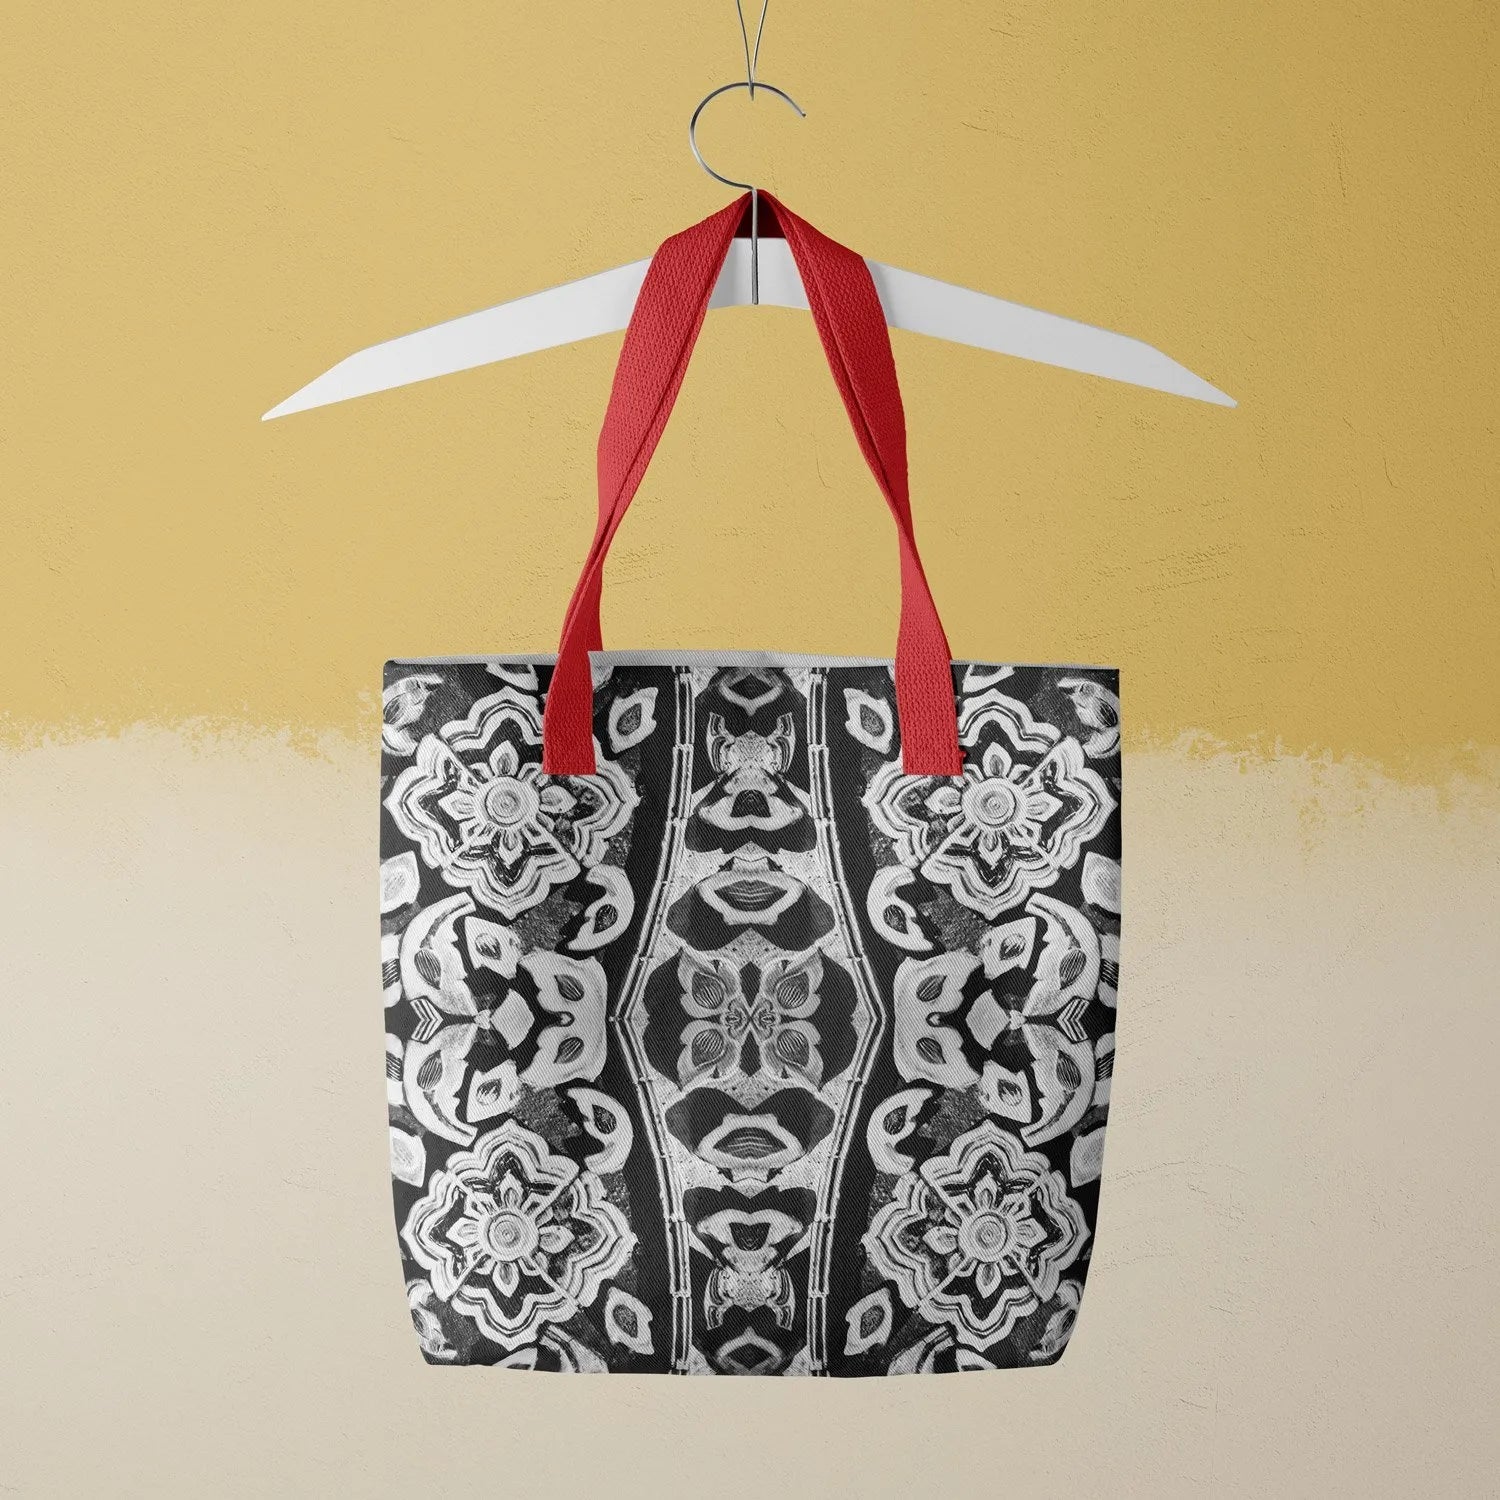 Masala Thai Tote - Black And White - Heavy Duty Reusable Grocery Bag - Shopping Totes - Aesthetic Art